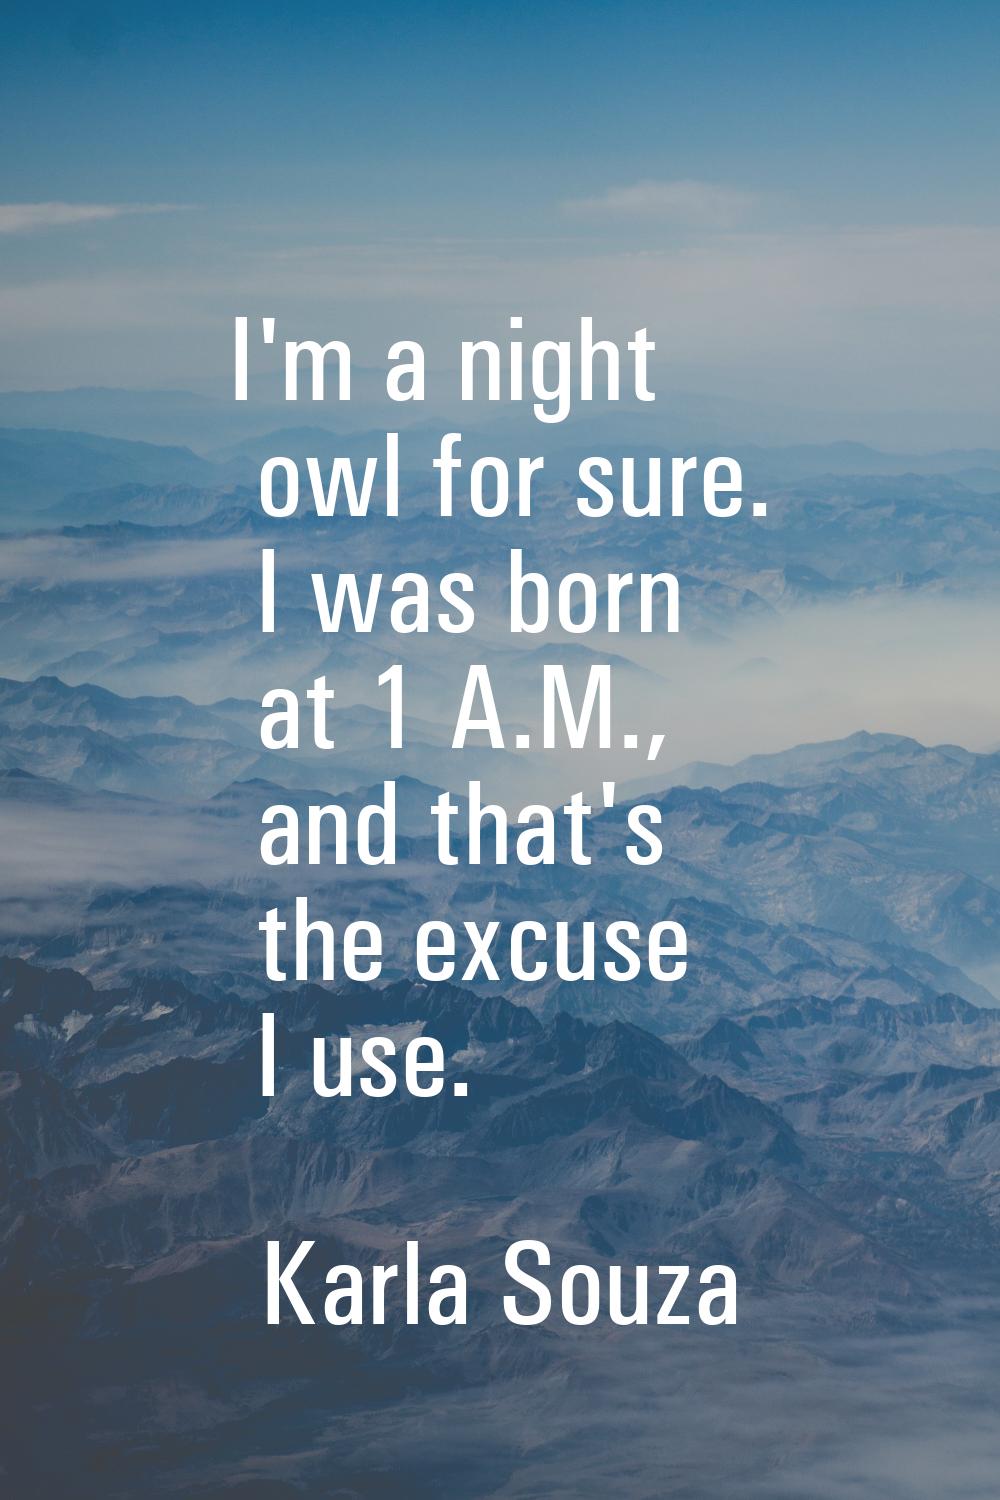 I'm a night owl for sure. I was born at 1 A.M., and that's the excuse I use.